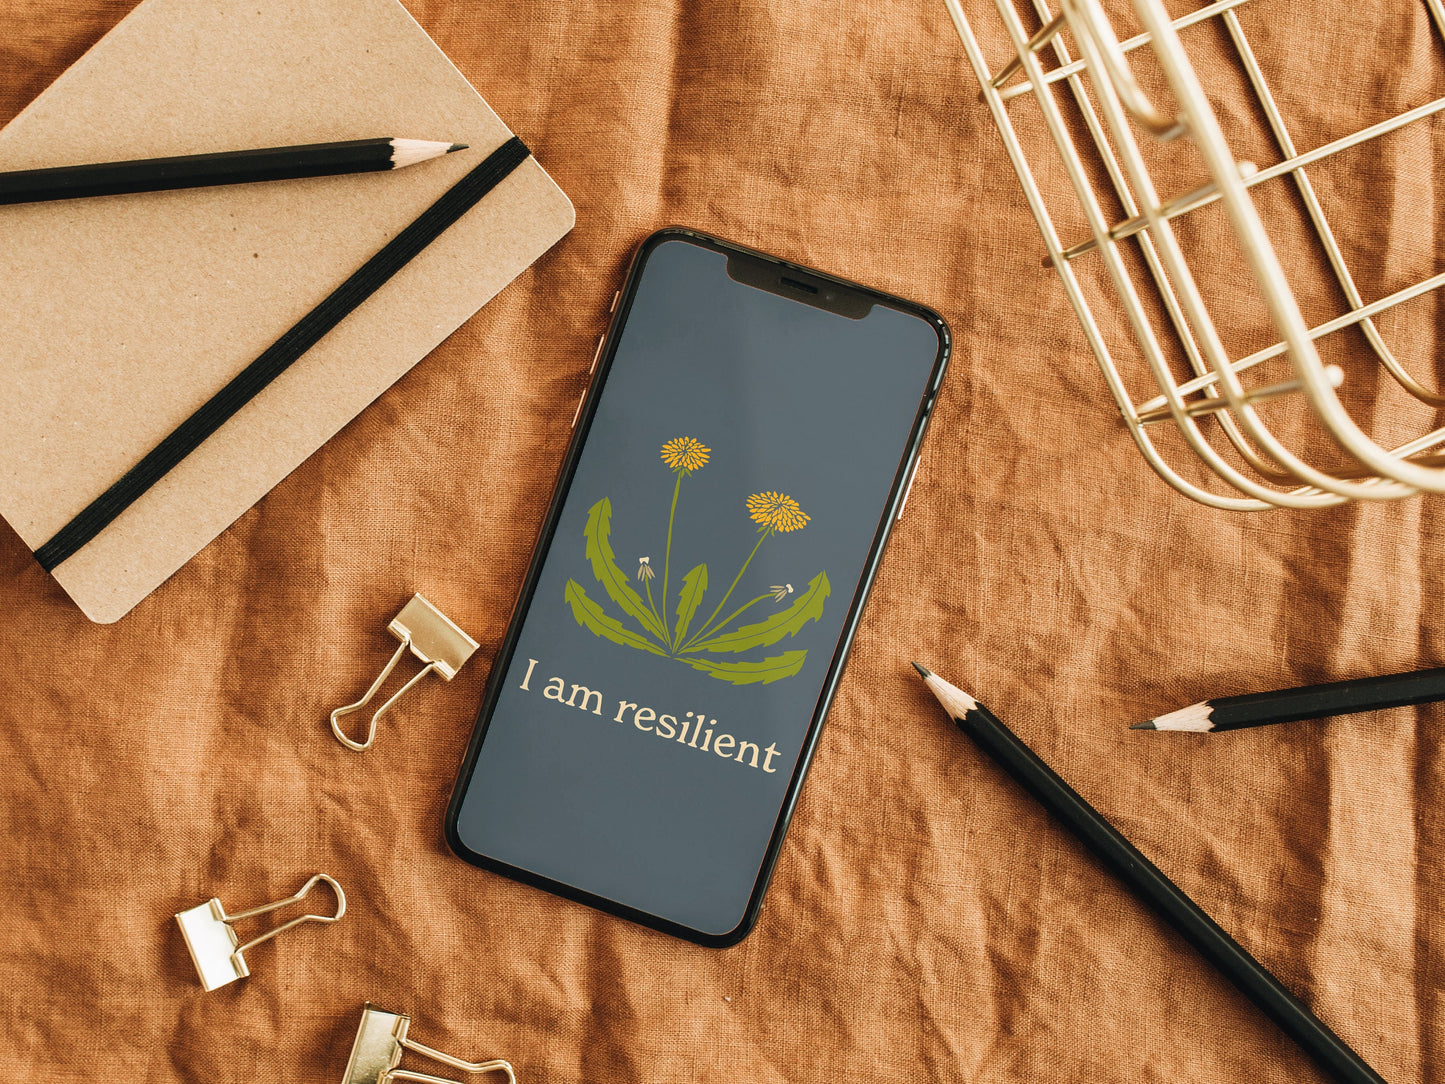 Phone Wallpaper - I am Resilient